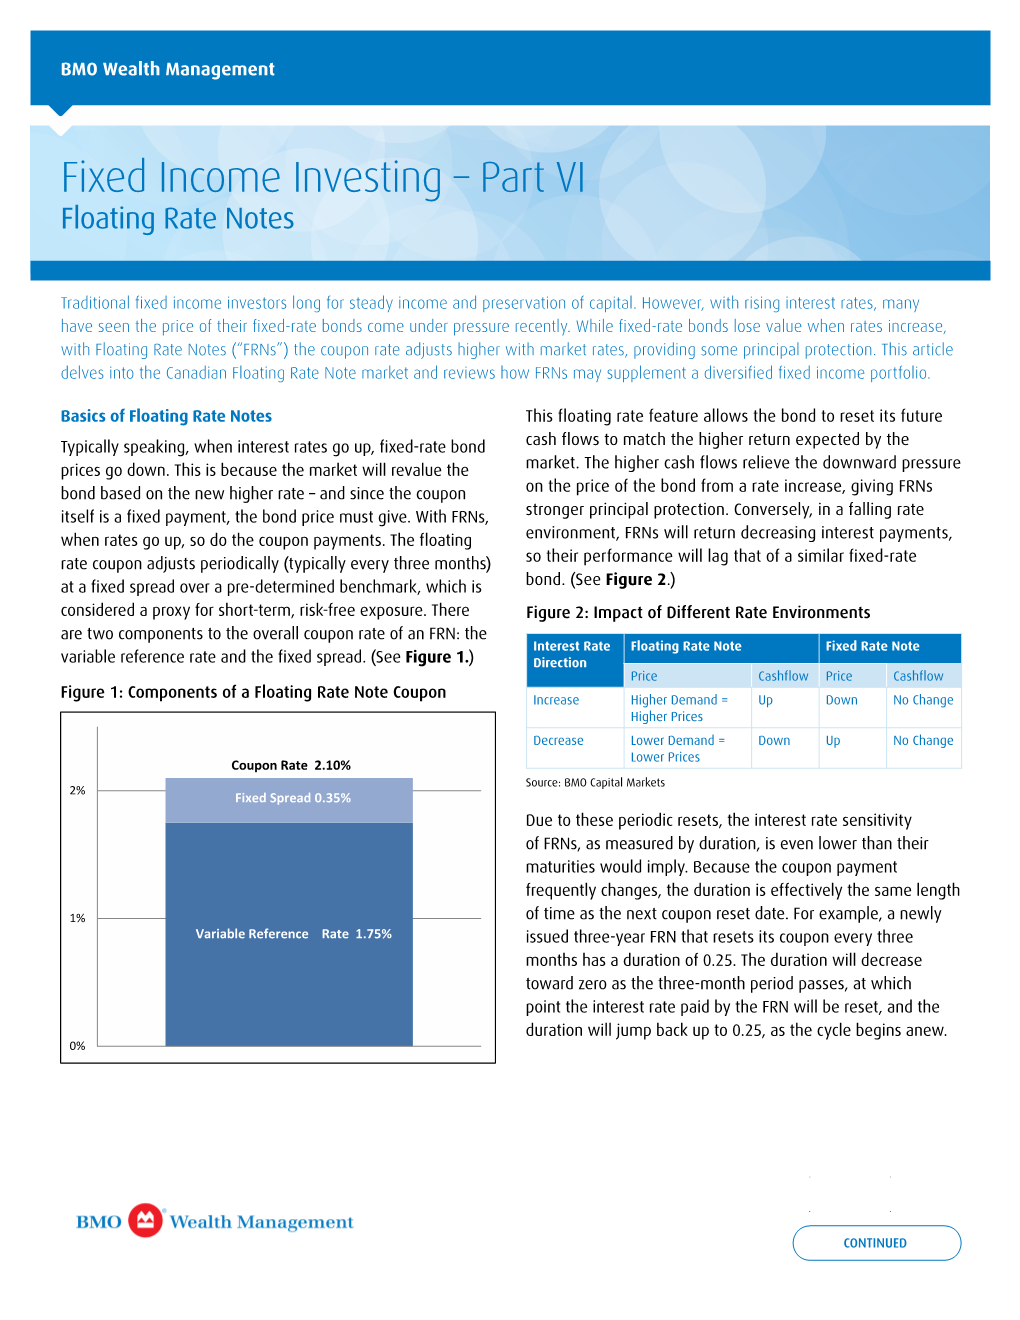 Fixed Income Investing – Part VI Floating Rate Notes